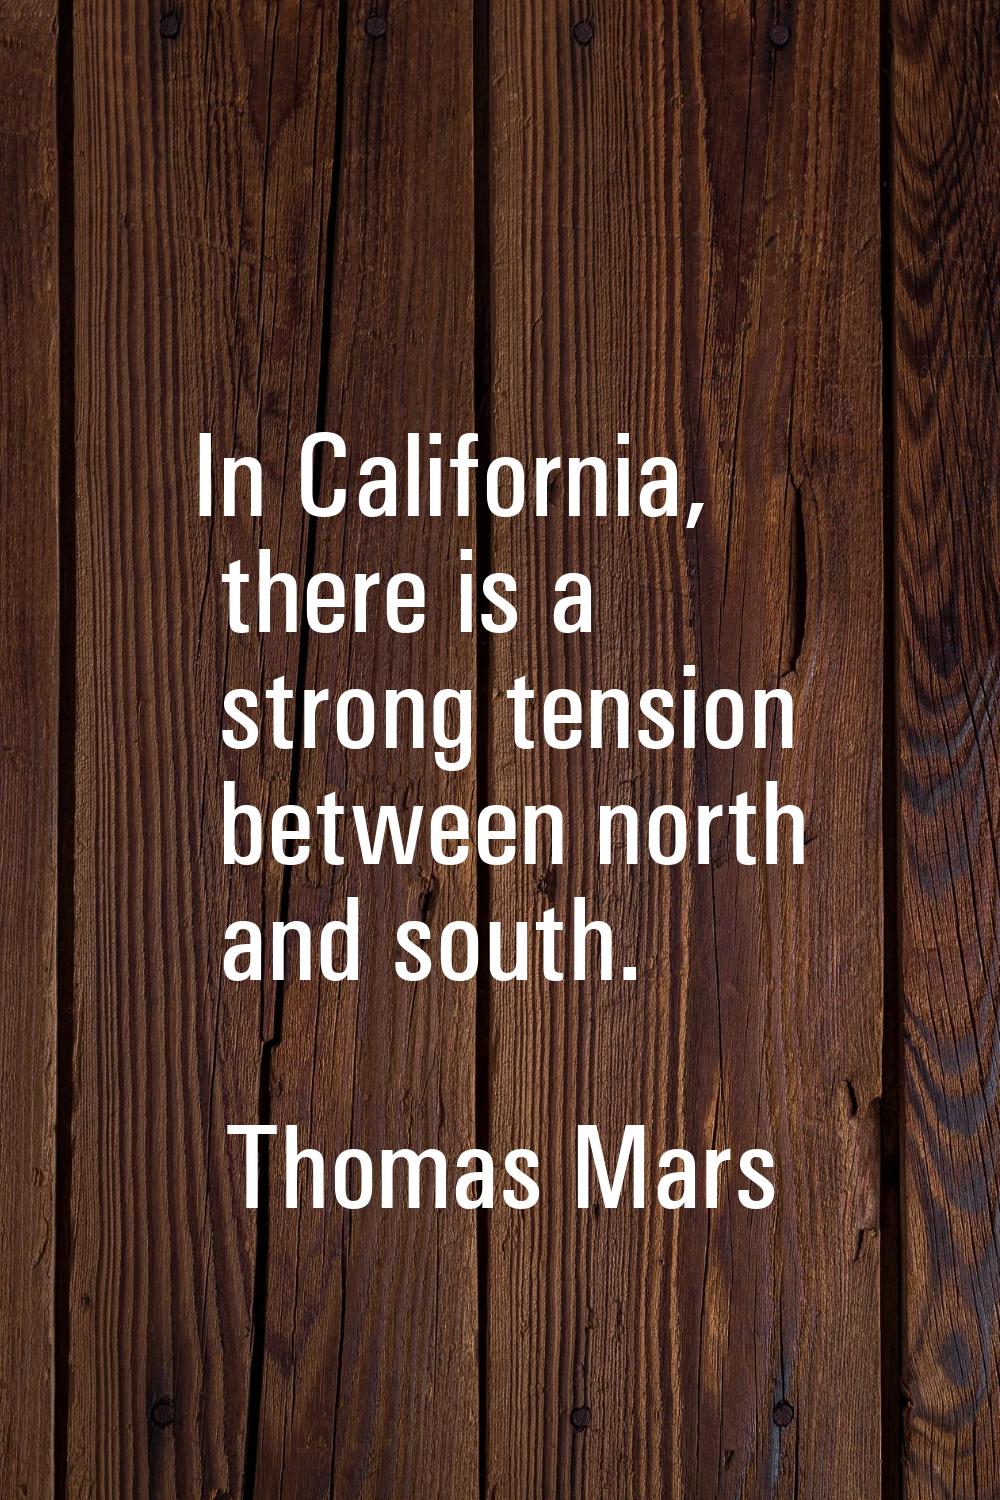 In California, there is a strong tension between north and south.